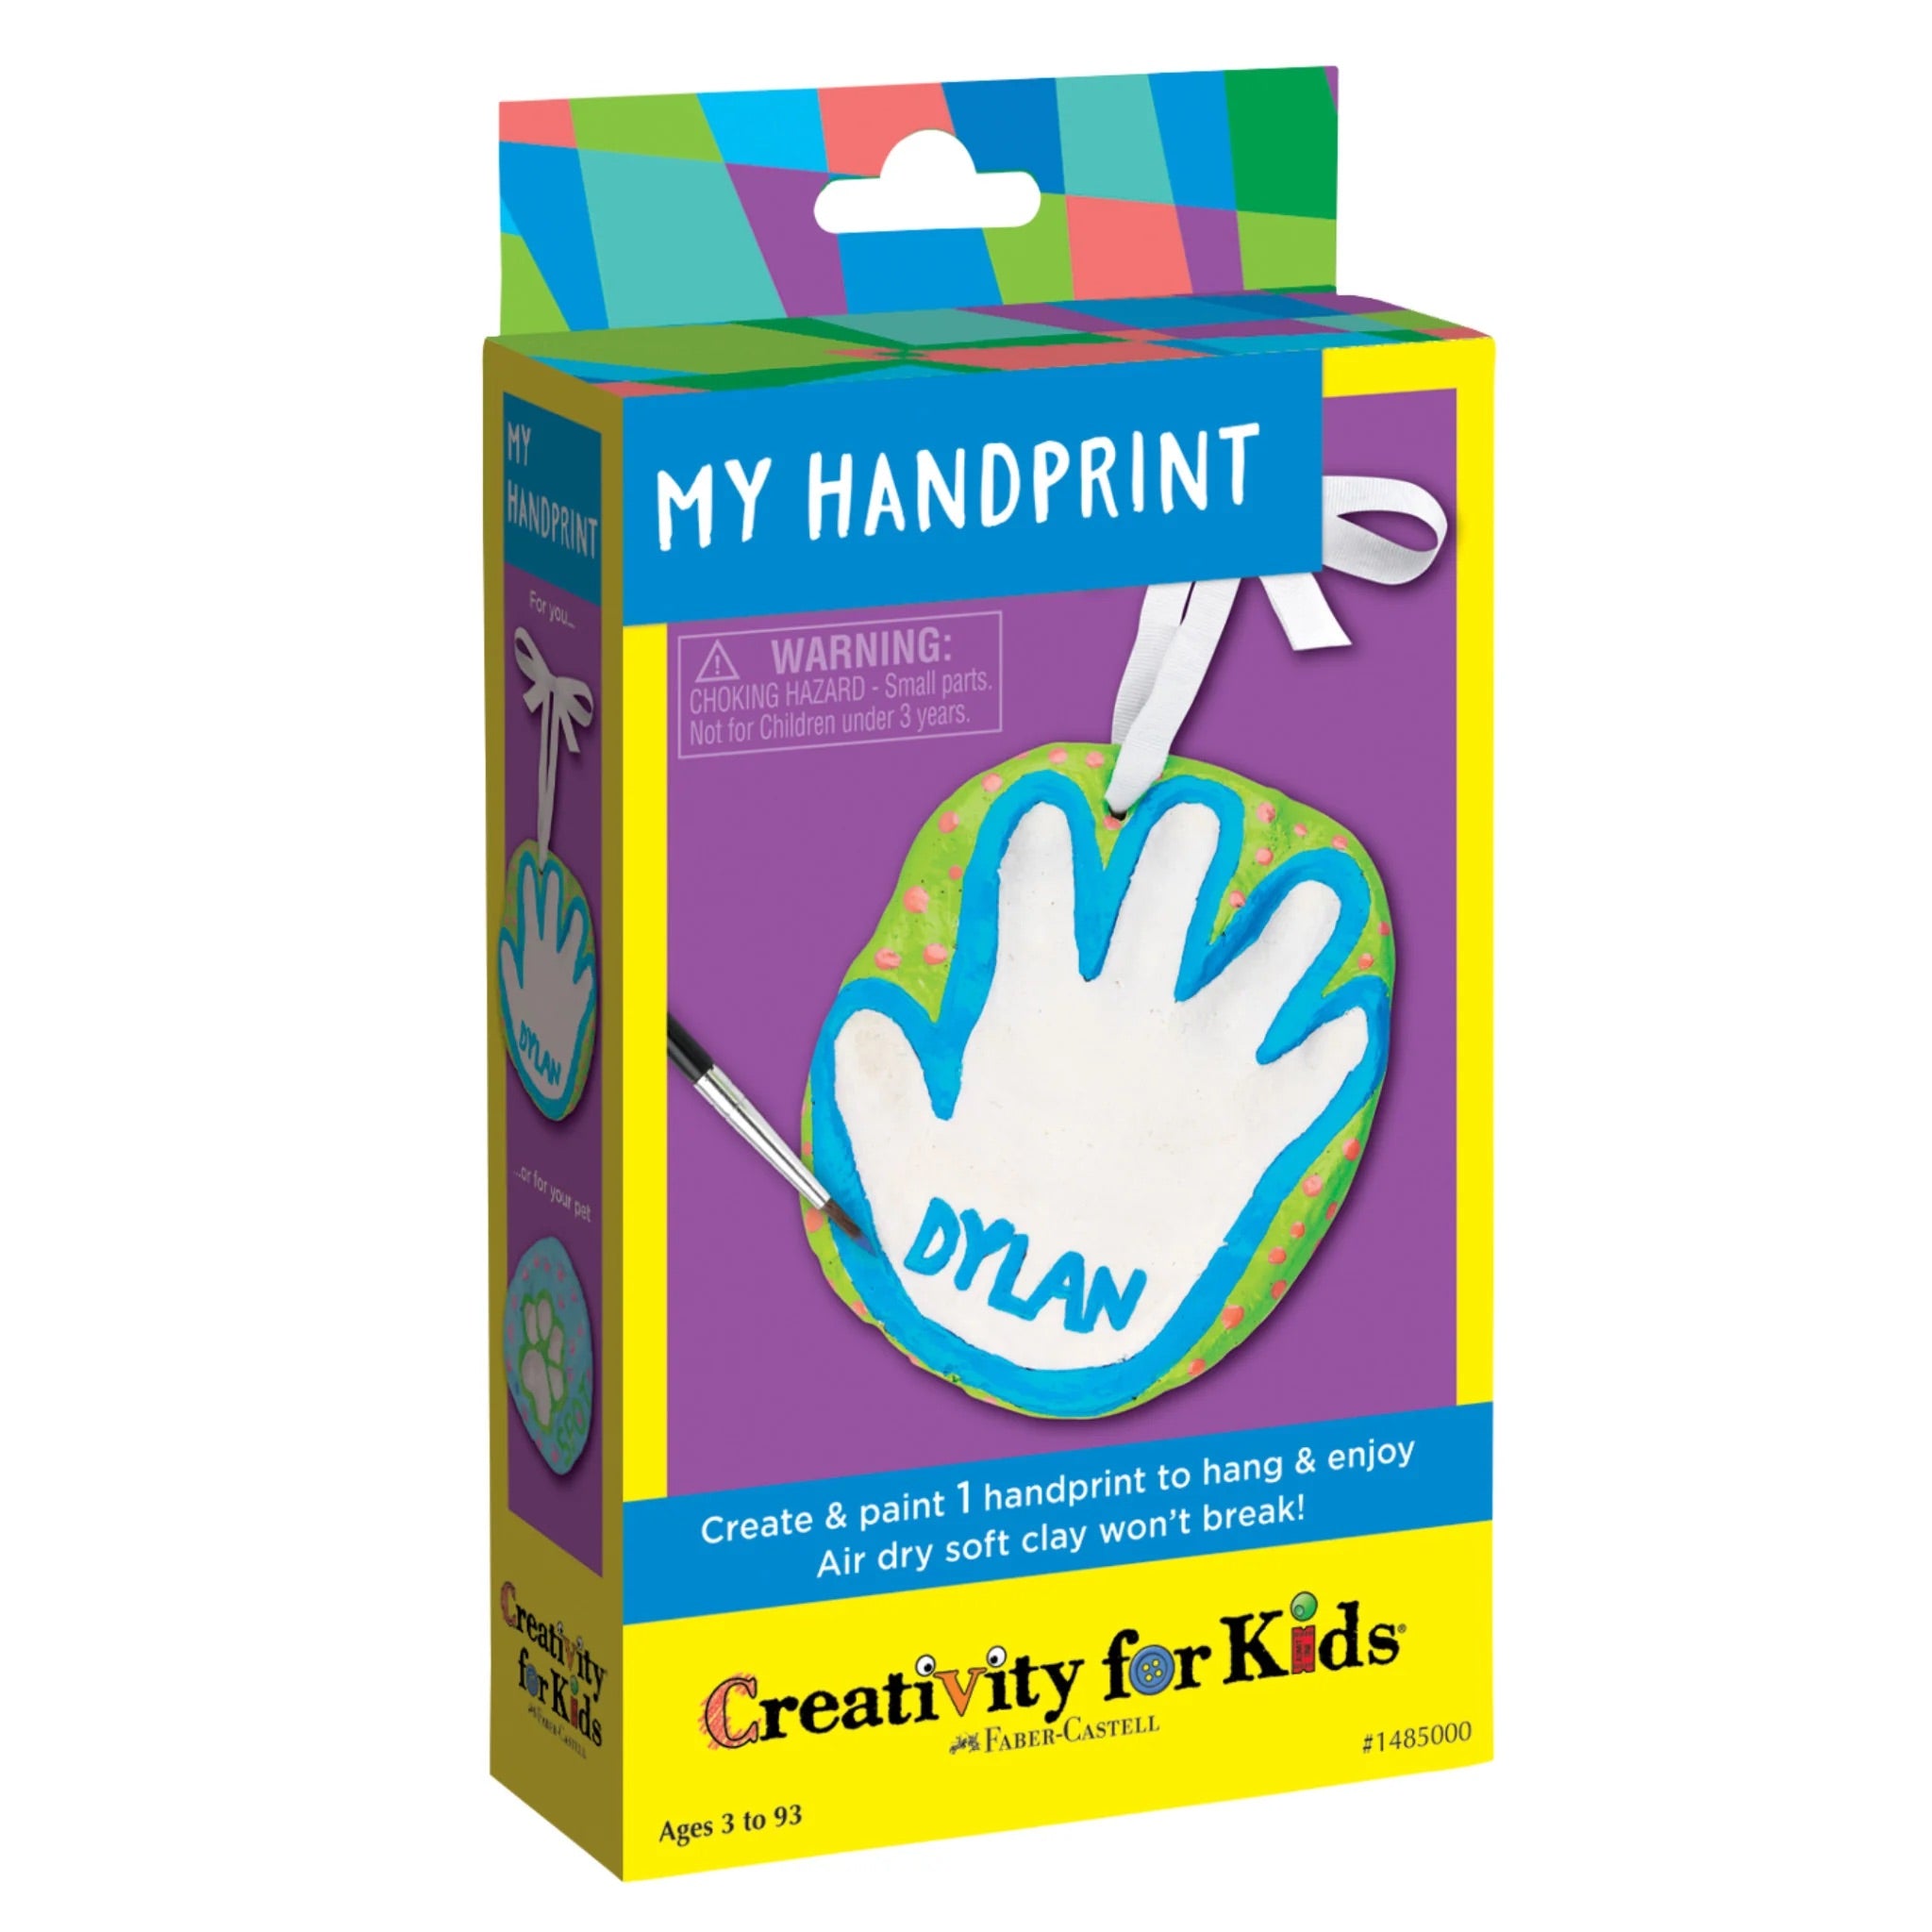 My Handprint by Faber-Castell #1485000